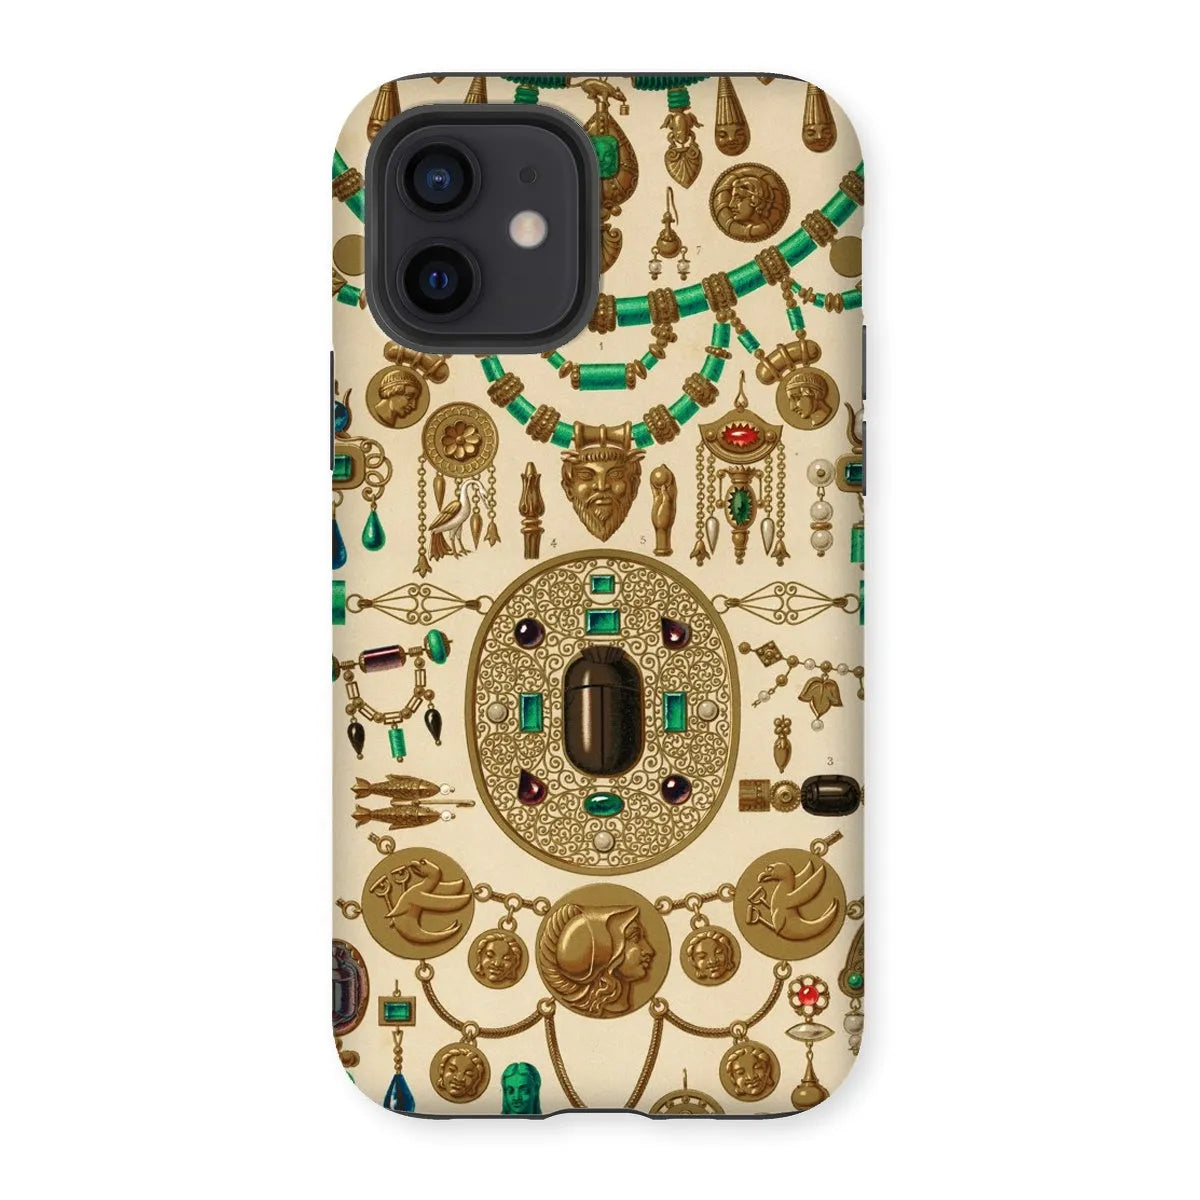 Etruscan Jewelry By Auguste Racinet Art Phone Case - Iphone 12 / Matte - Mobile Phone Cases - Aesthetic Art